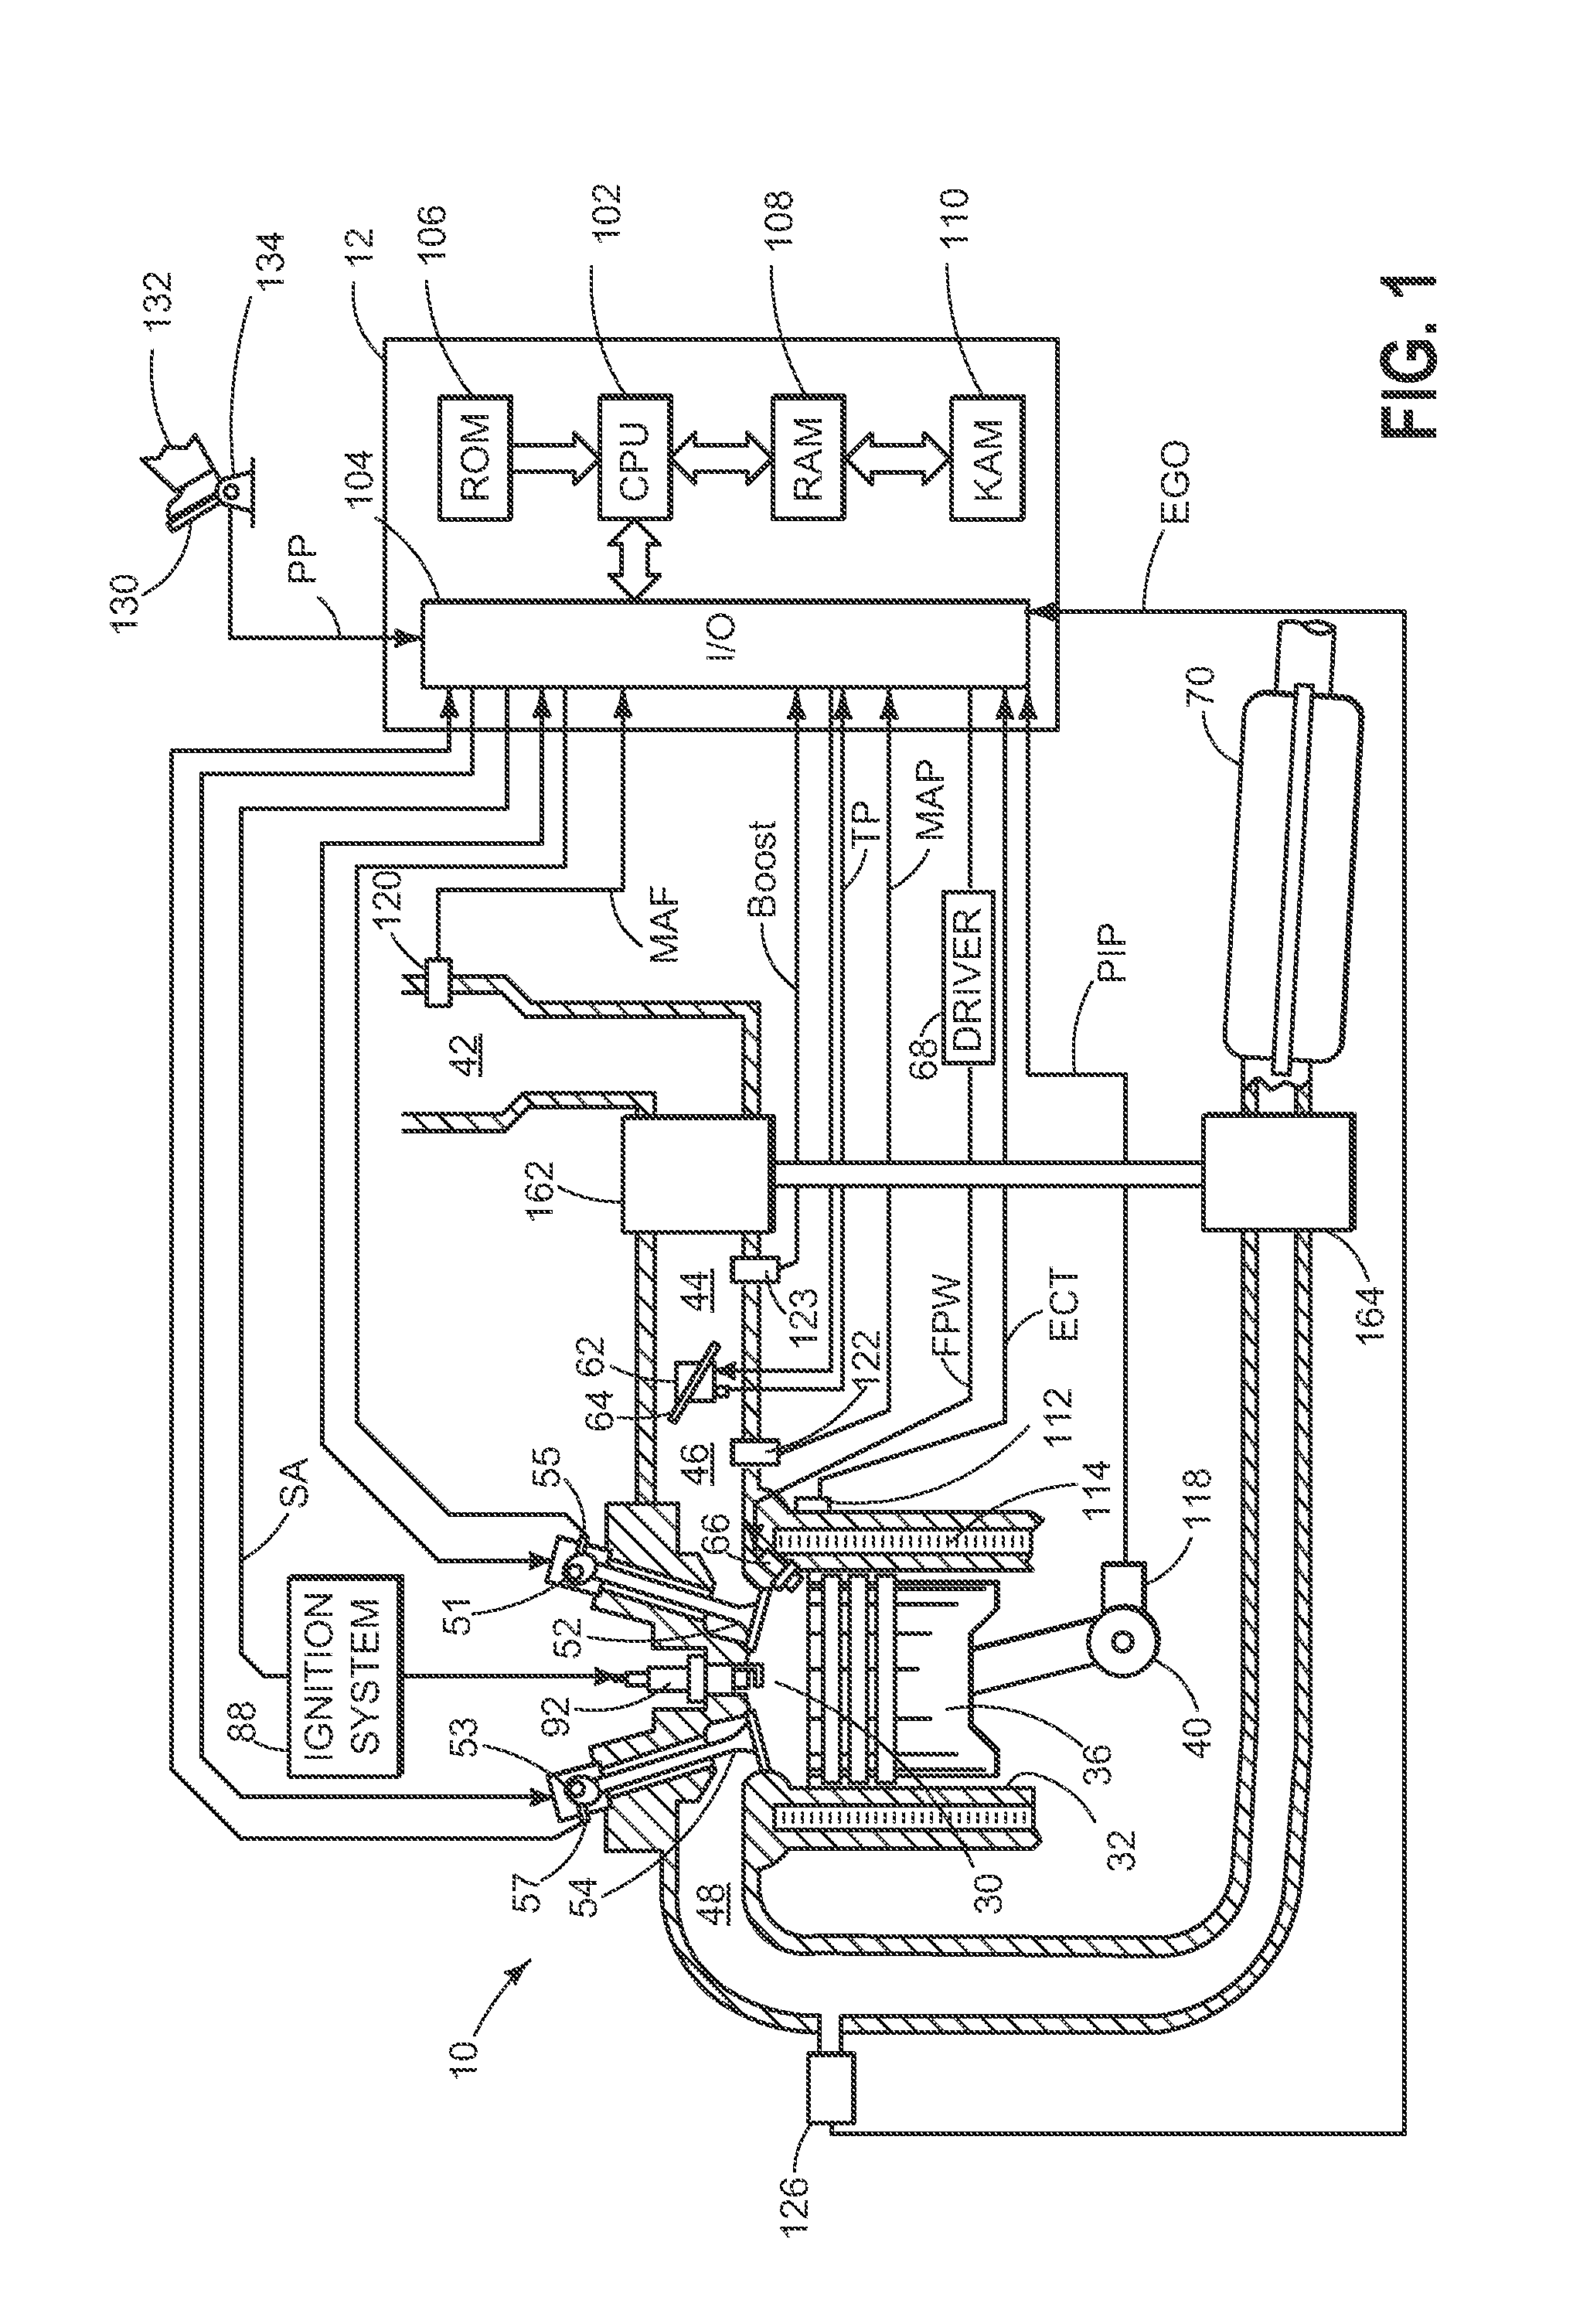 Method and system for engine air control